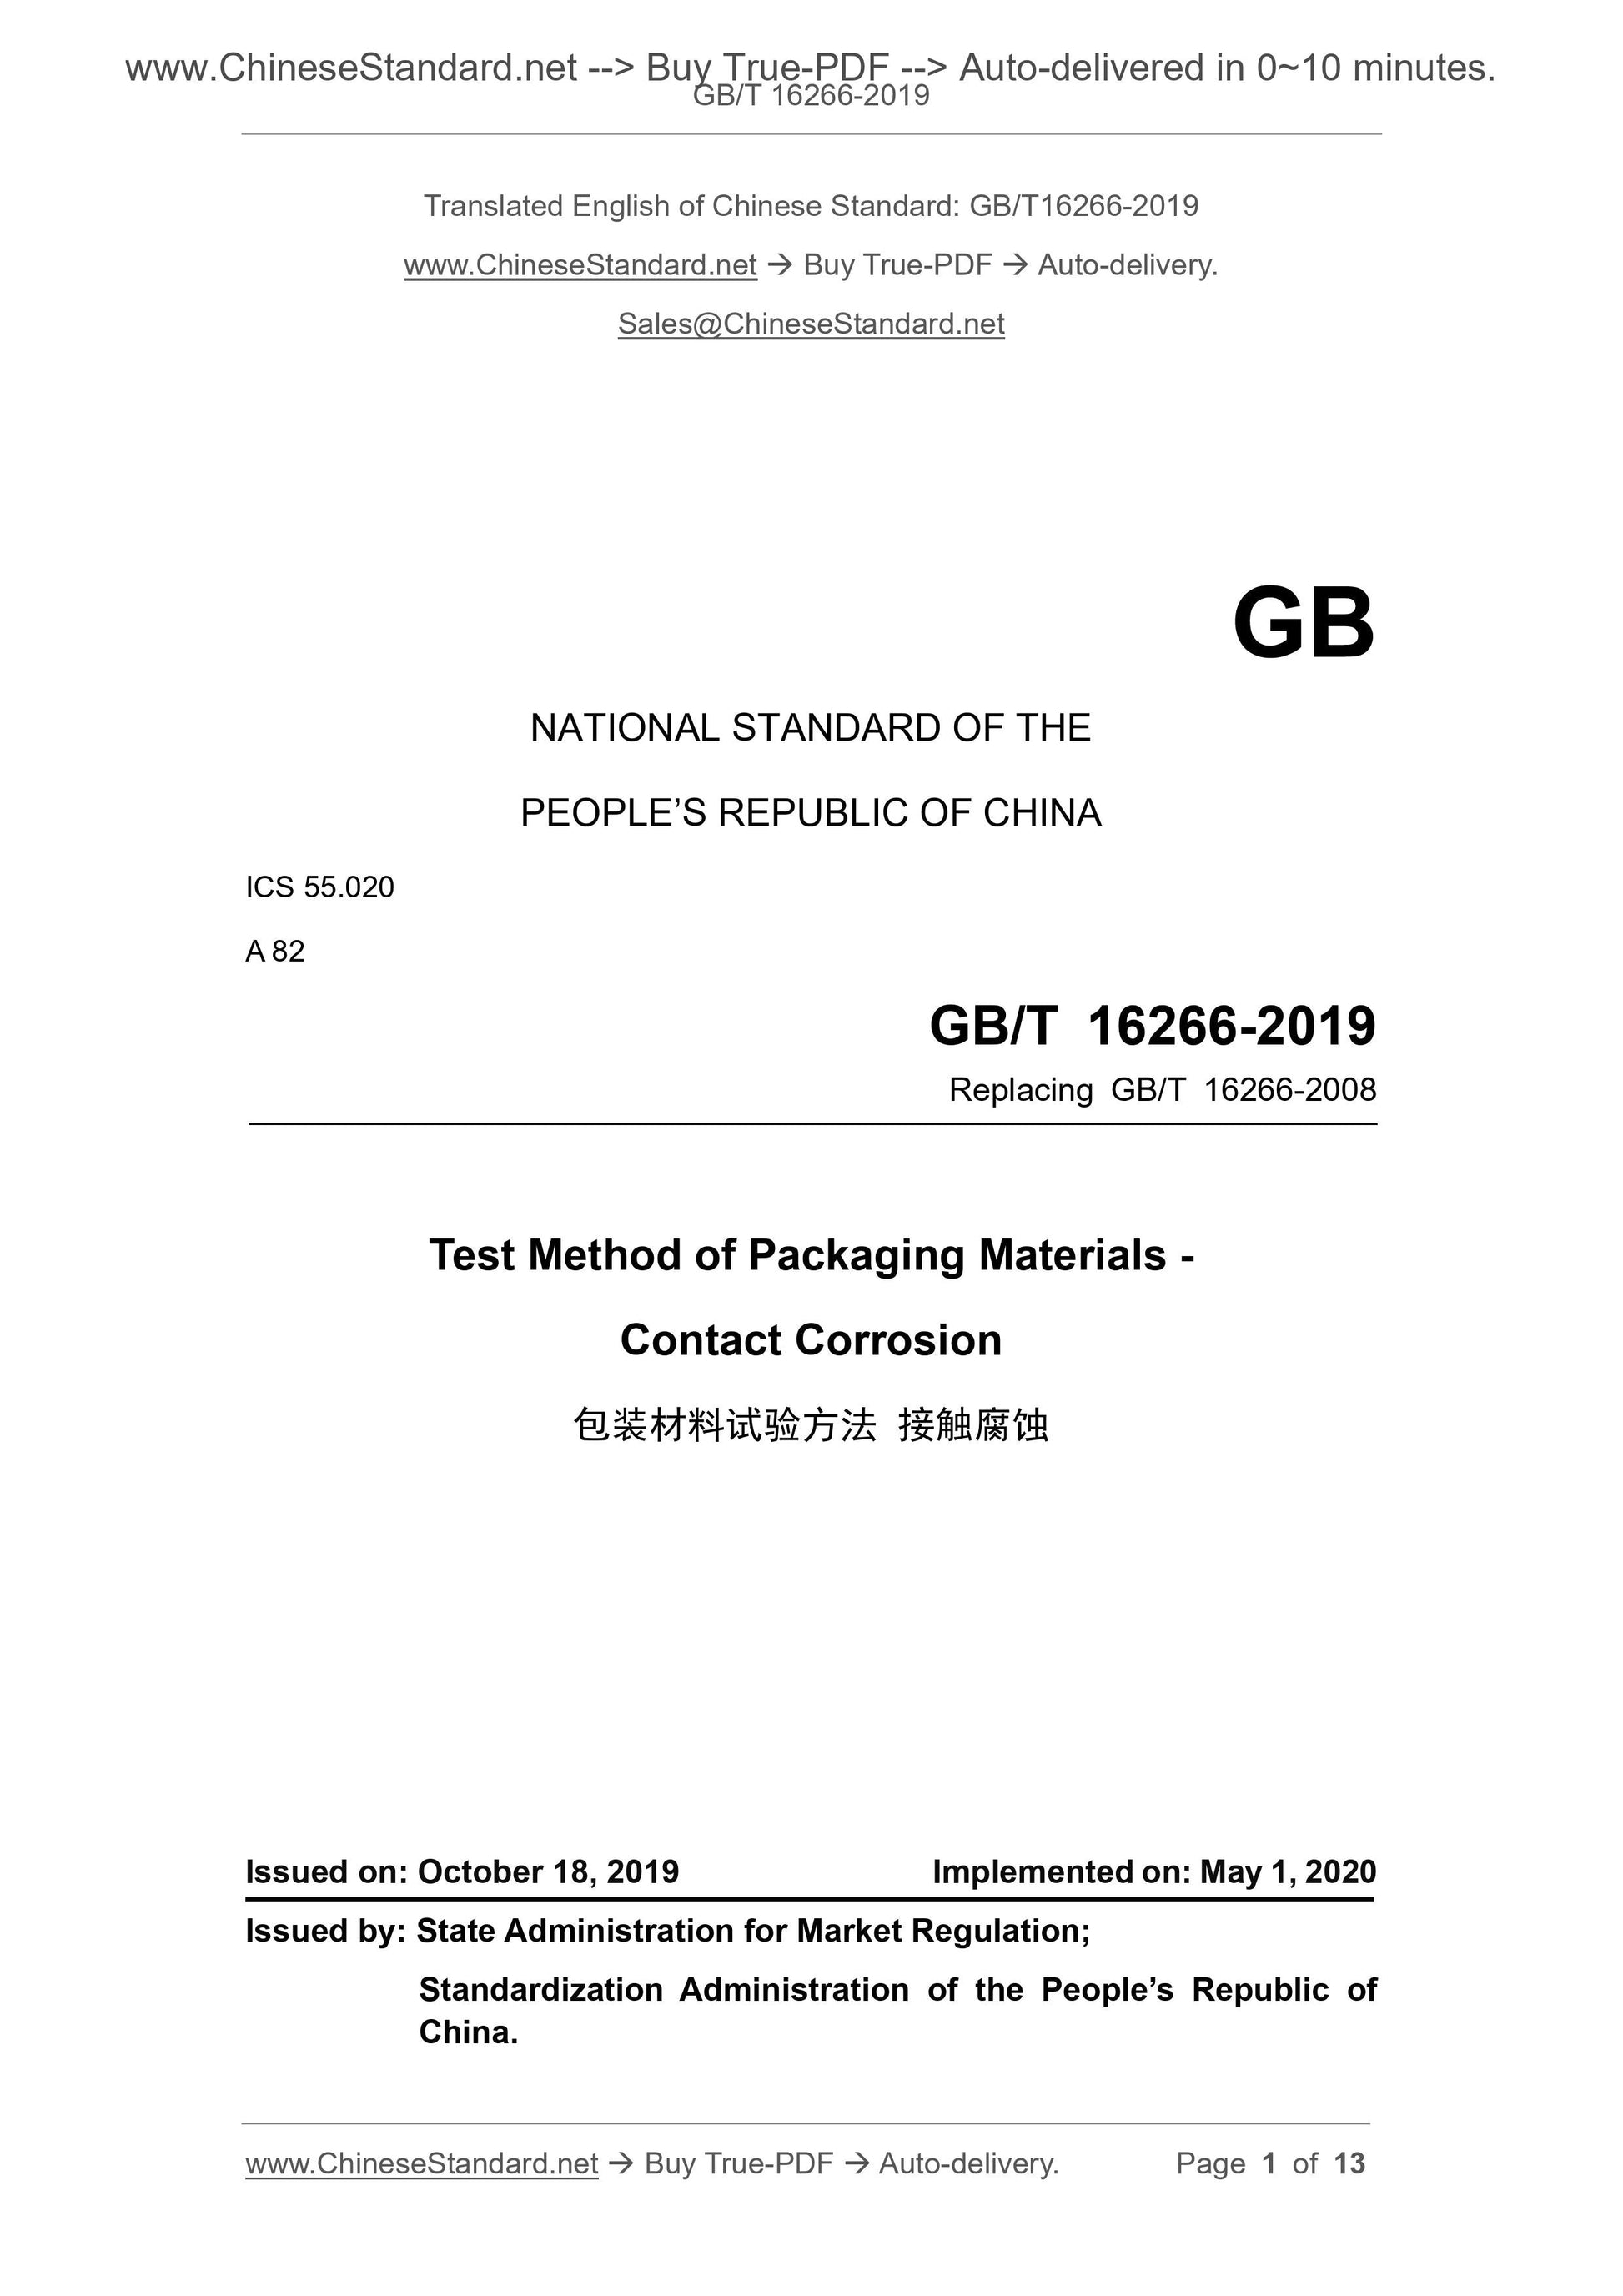 GB/T 16266-2019 Page 1